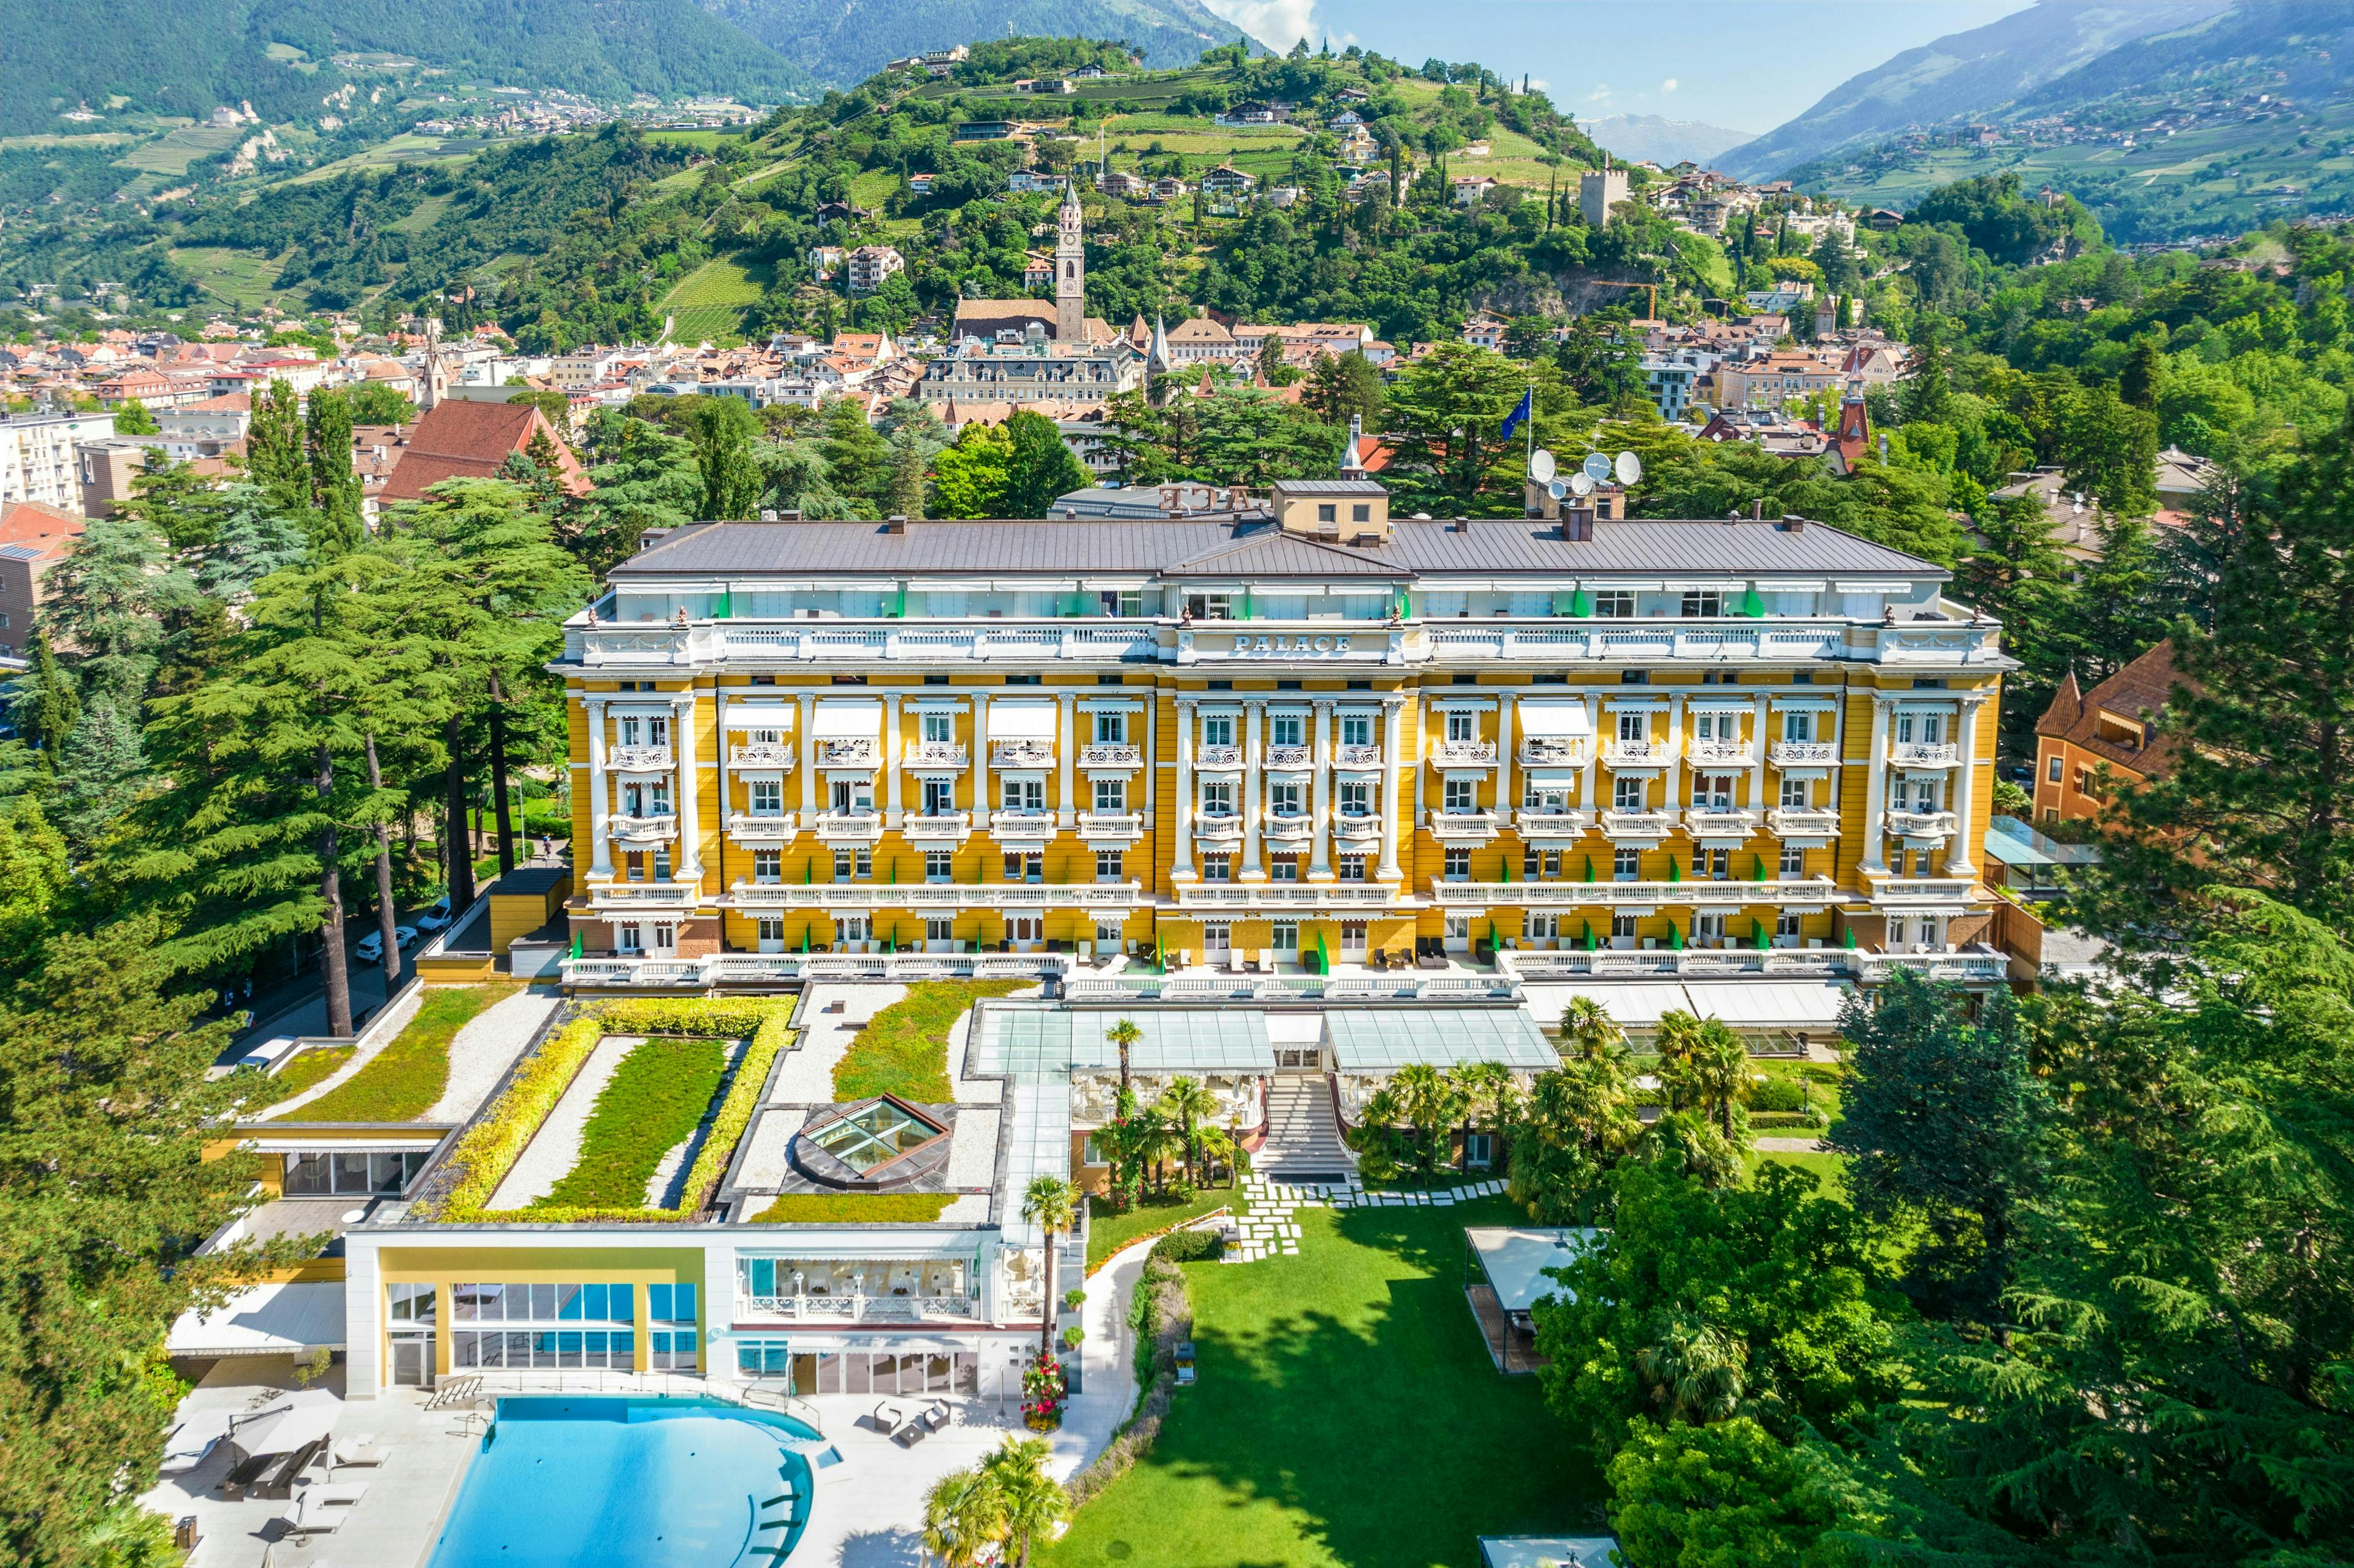 hotel palace merano scenery outdoors nature landscape building mansion house housing campus architecture